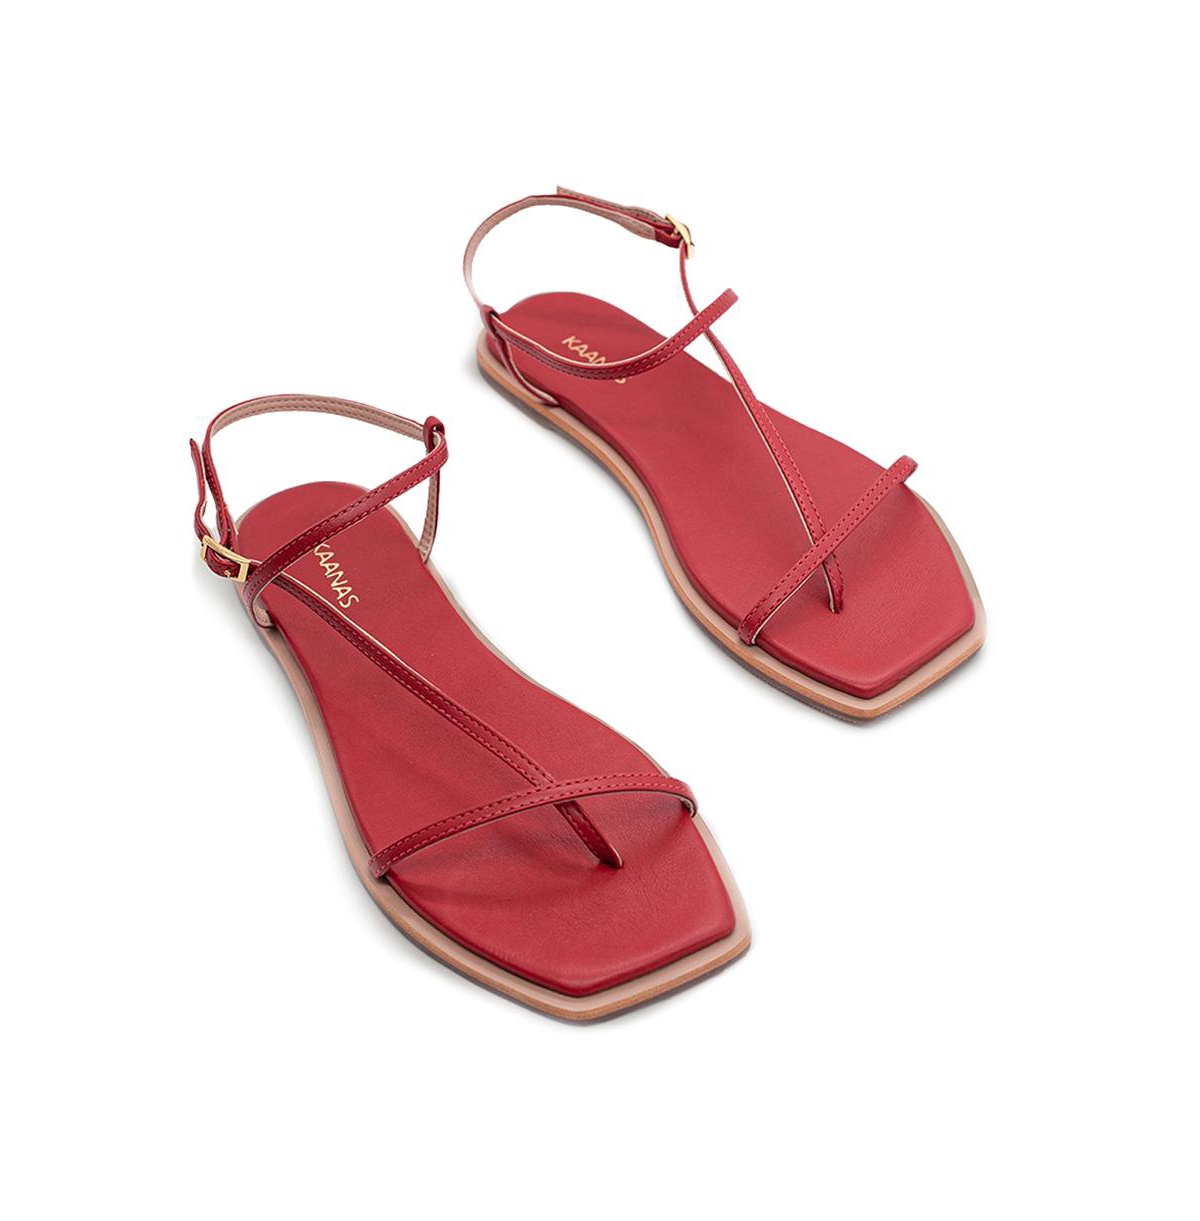 Alayta Square-toe Naked Sandal - Chili red